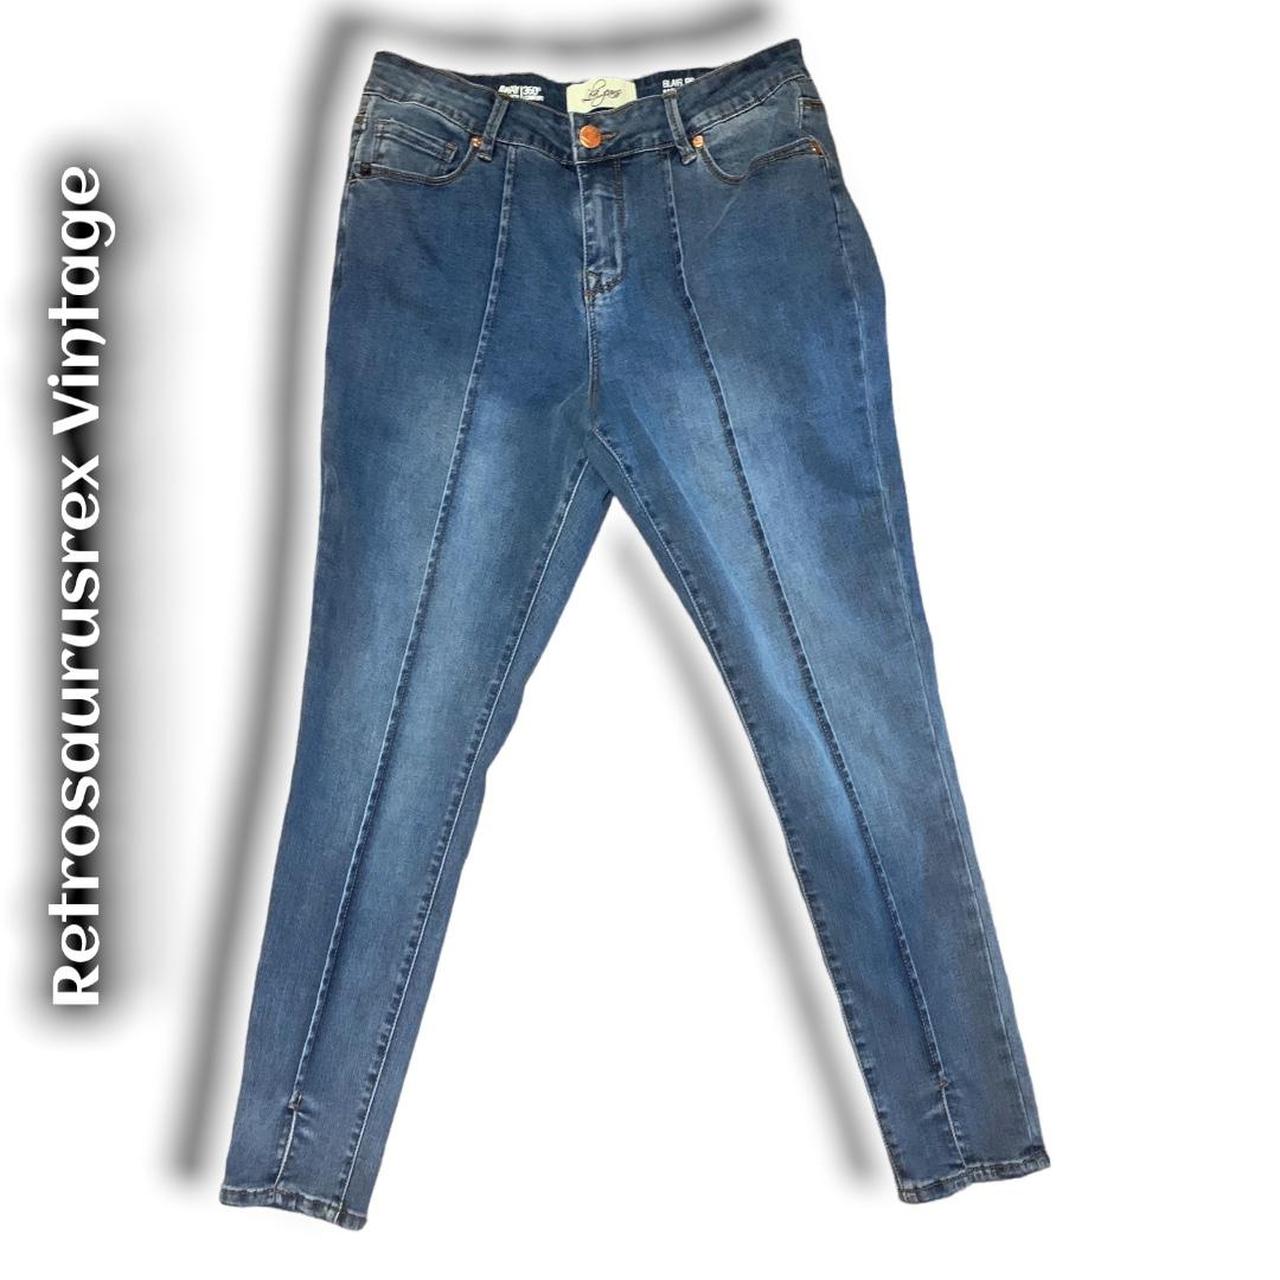 Product Image 3 - #Lola Jeans #Blair RB #MidRise